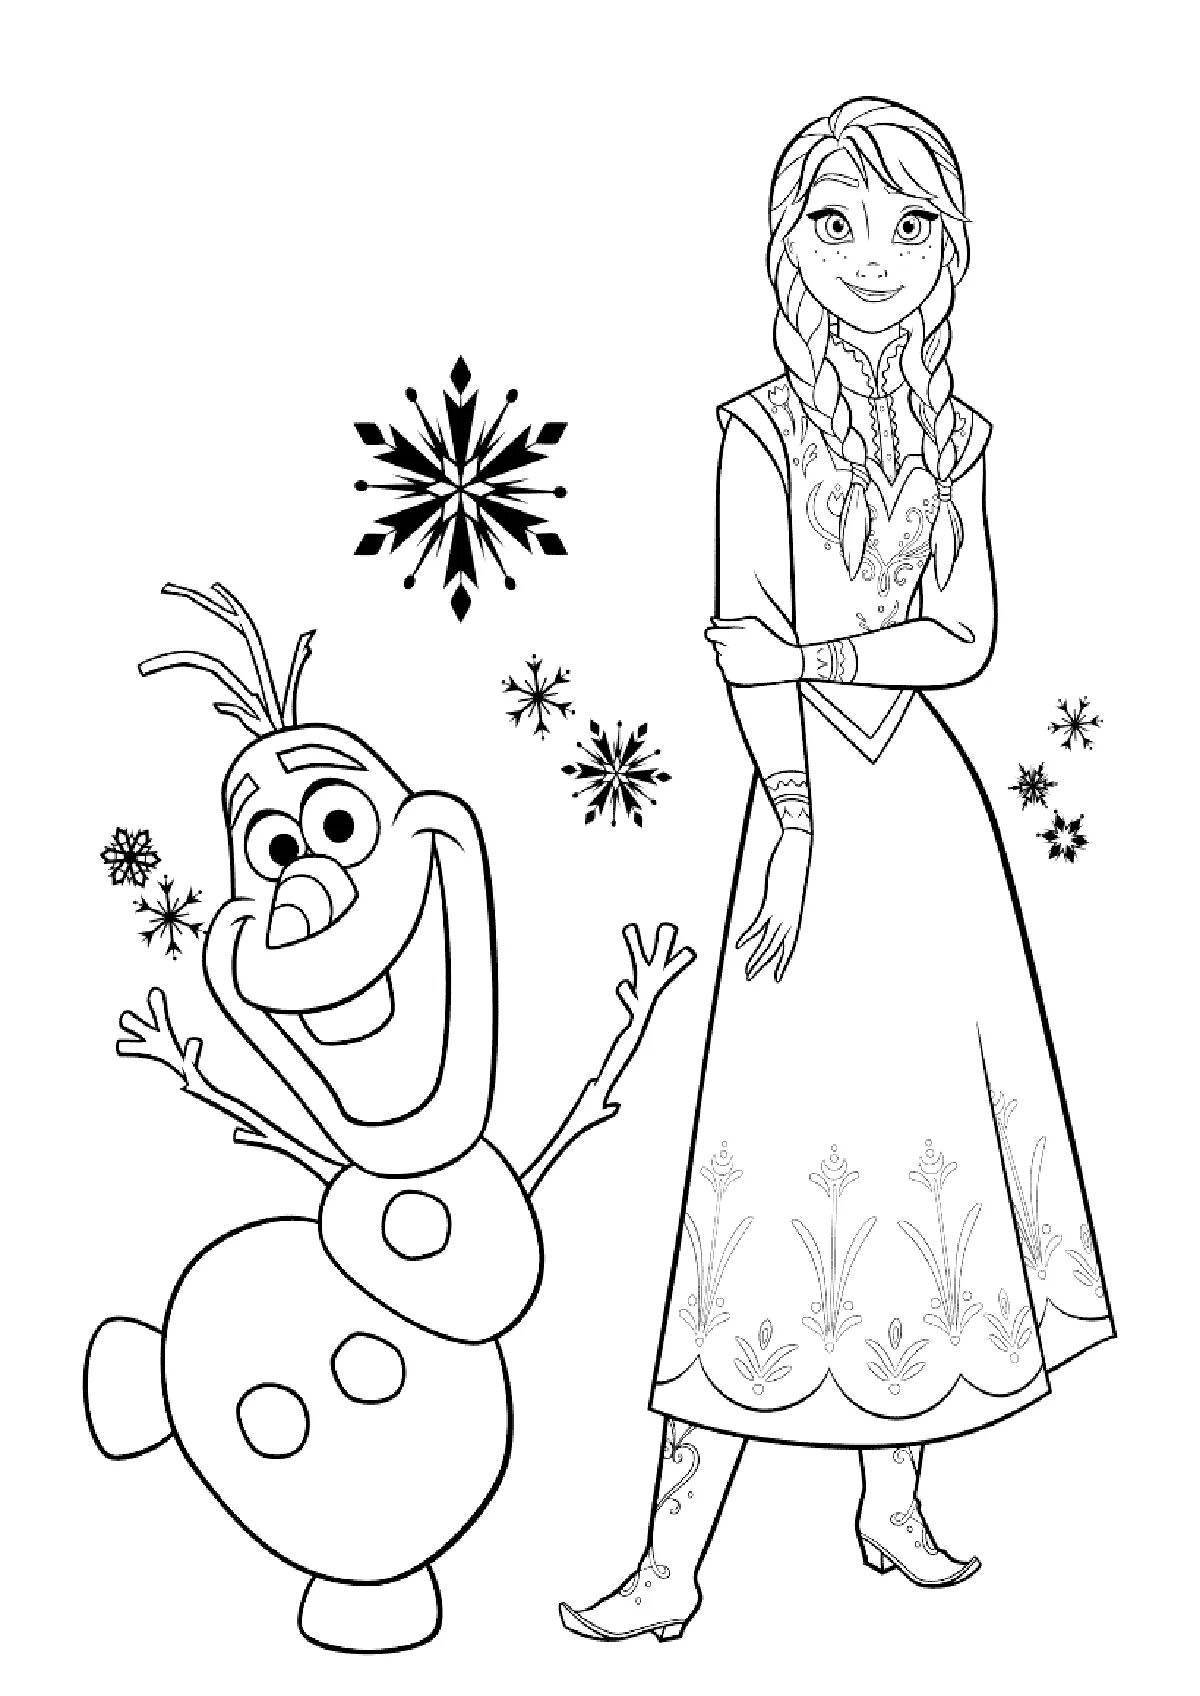 Coloring page blissful cold heart